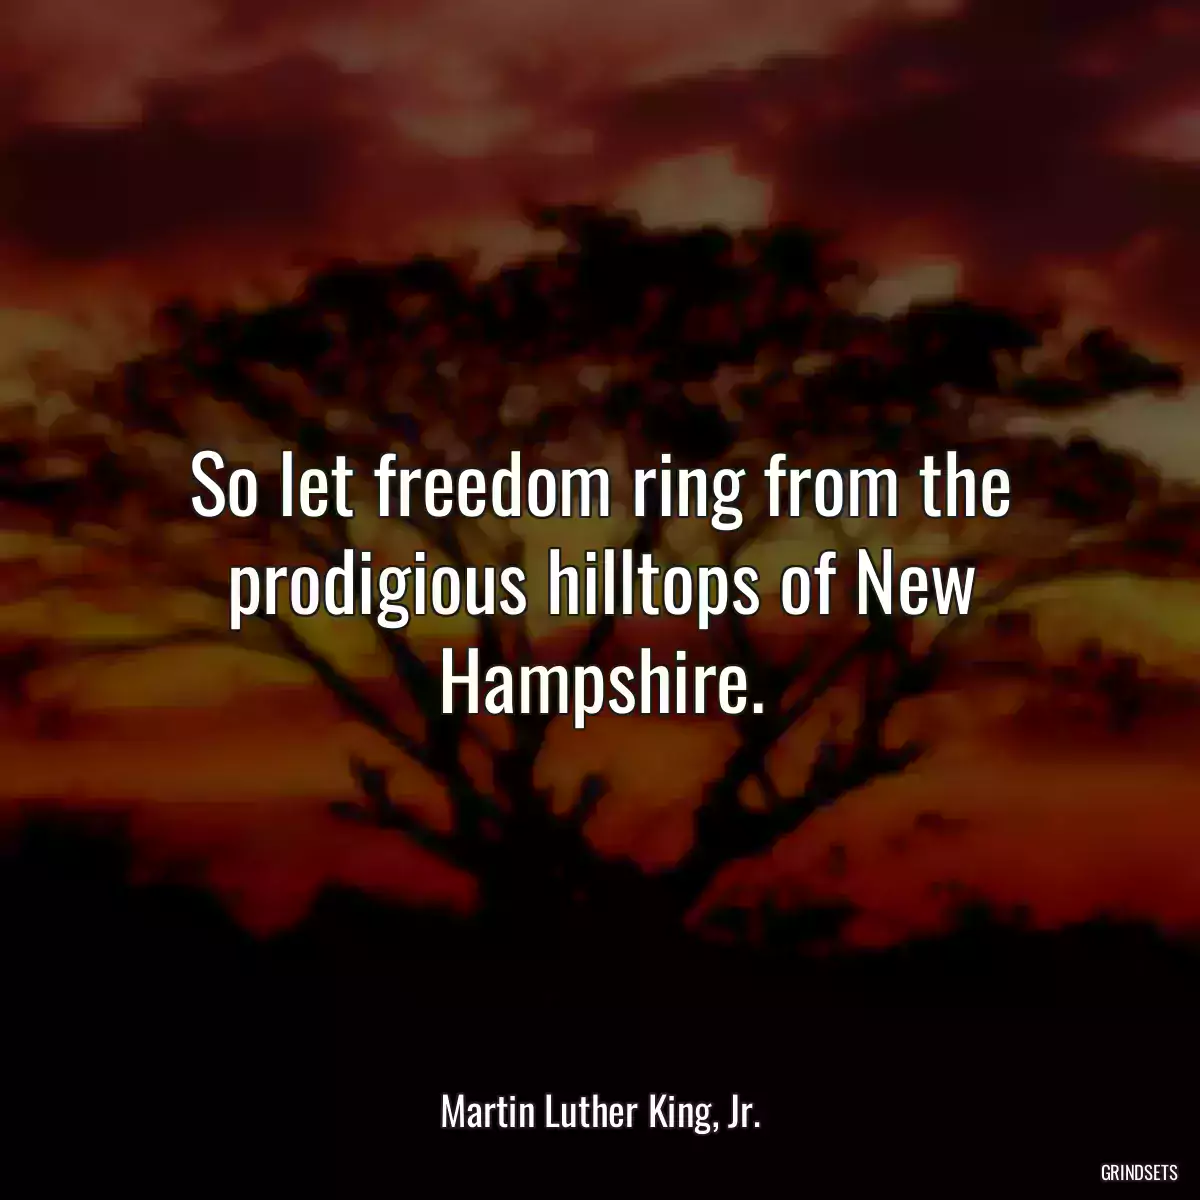 So let freedom ring from the prodigious hilltops of New Hampshire.